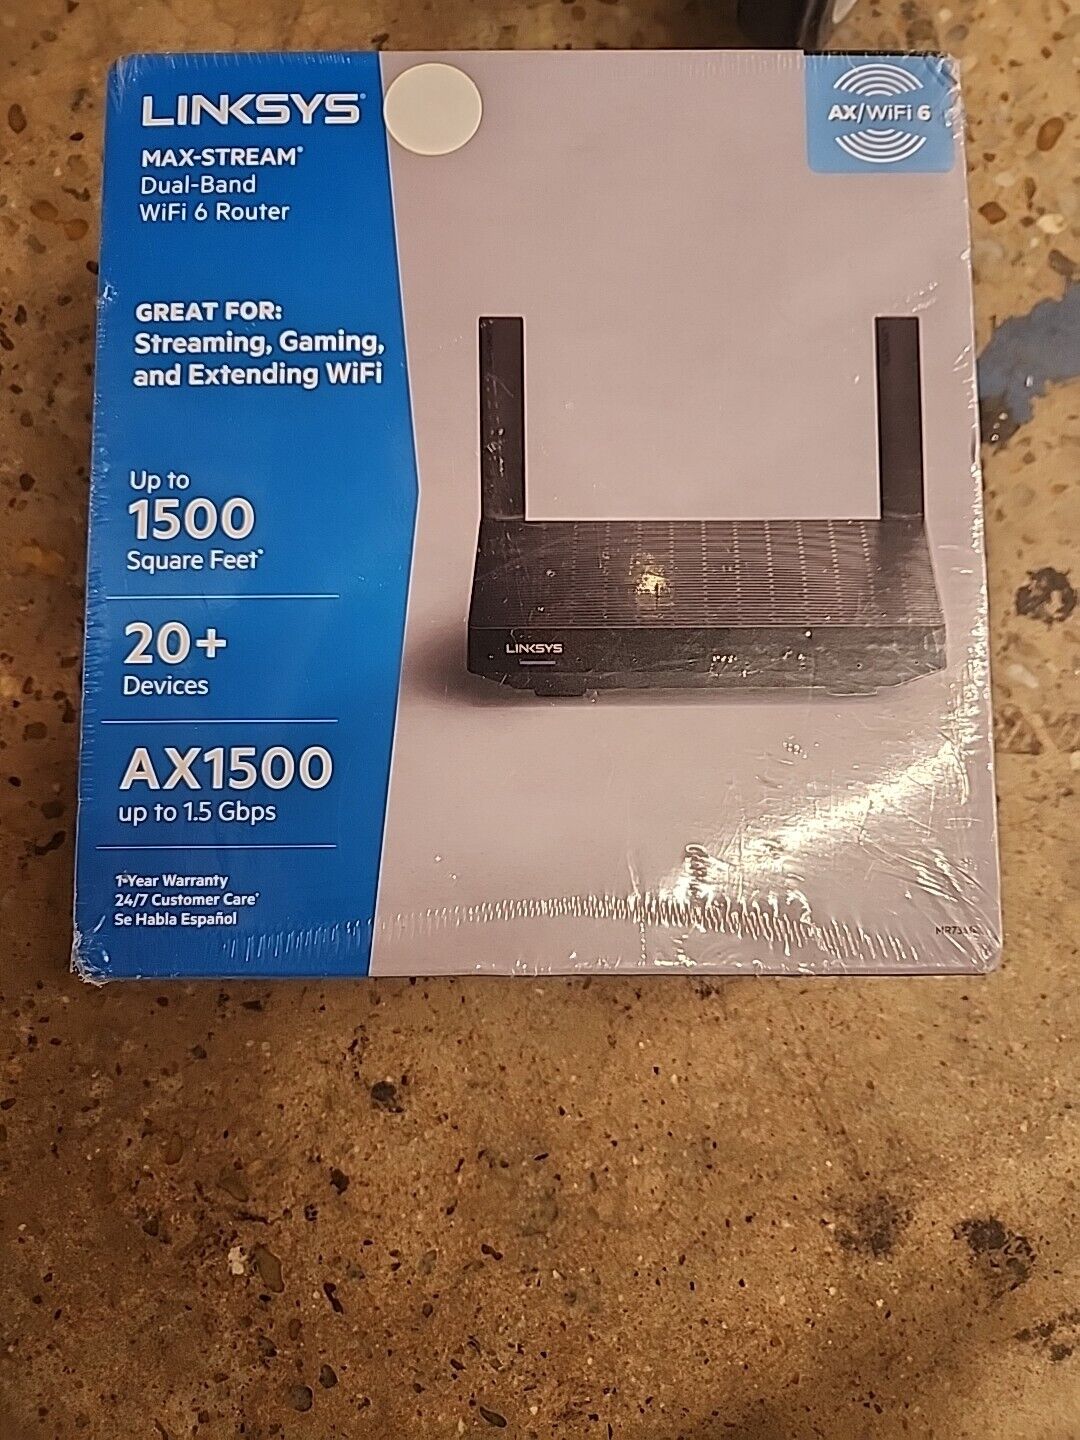 Linksys Dual-Band MAX-STREAM Mesh WiFi 6 Router AX1500 (MR7340) - NEW SEALED Fs